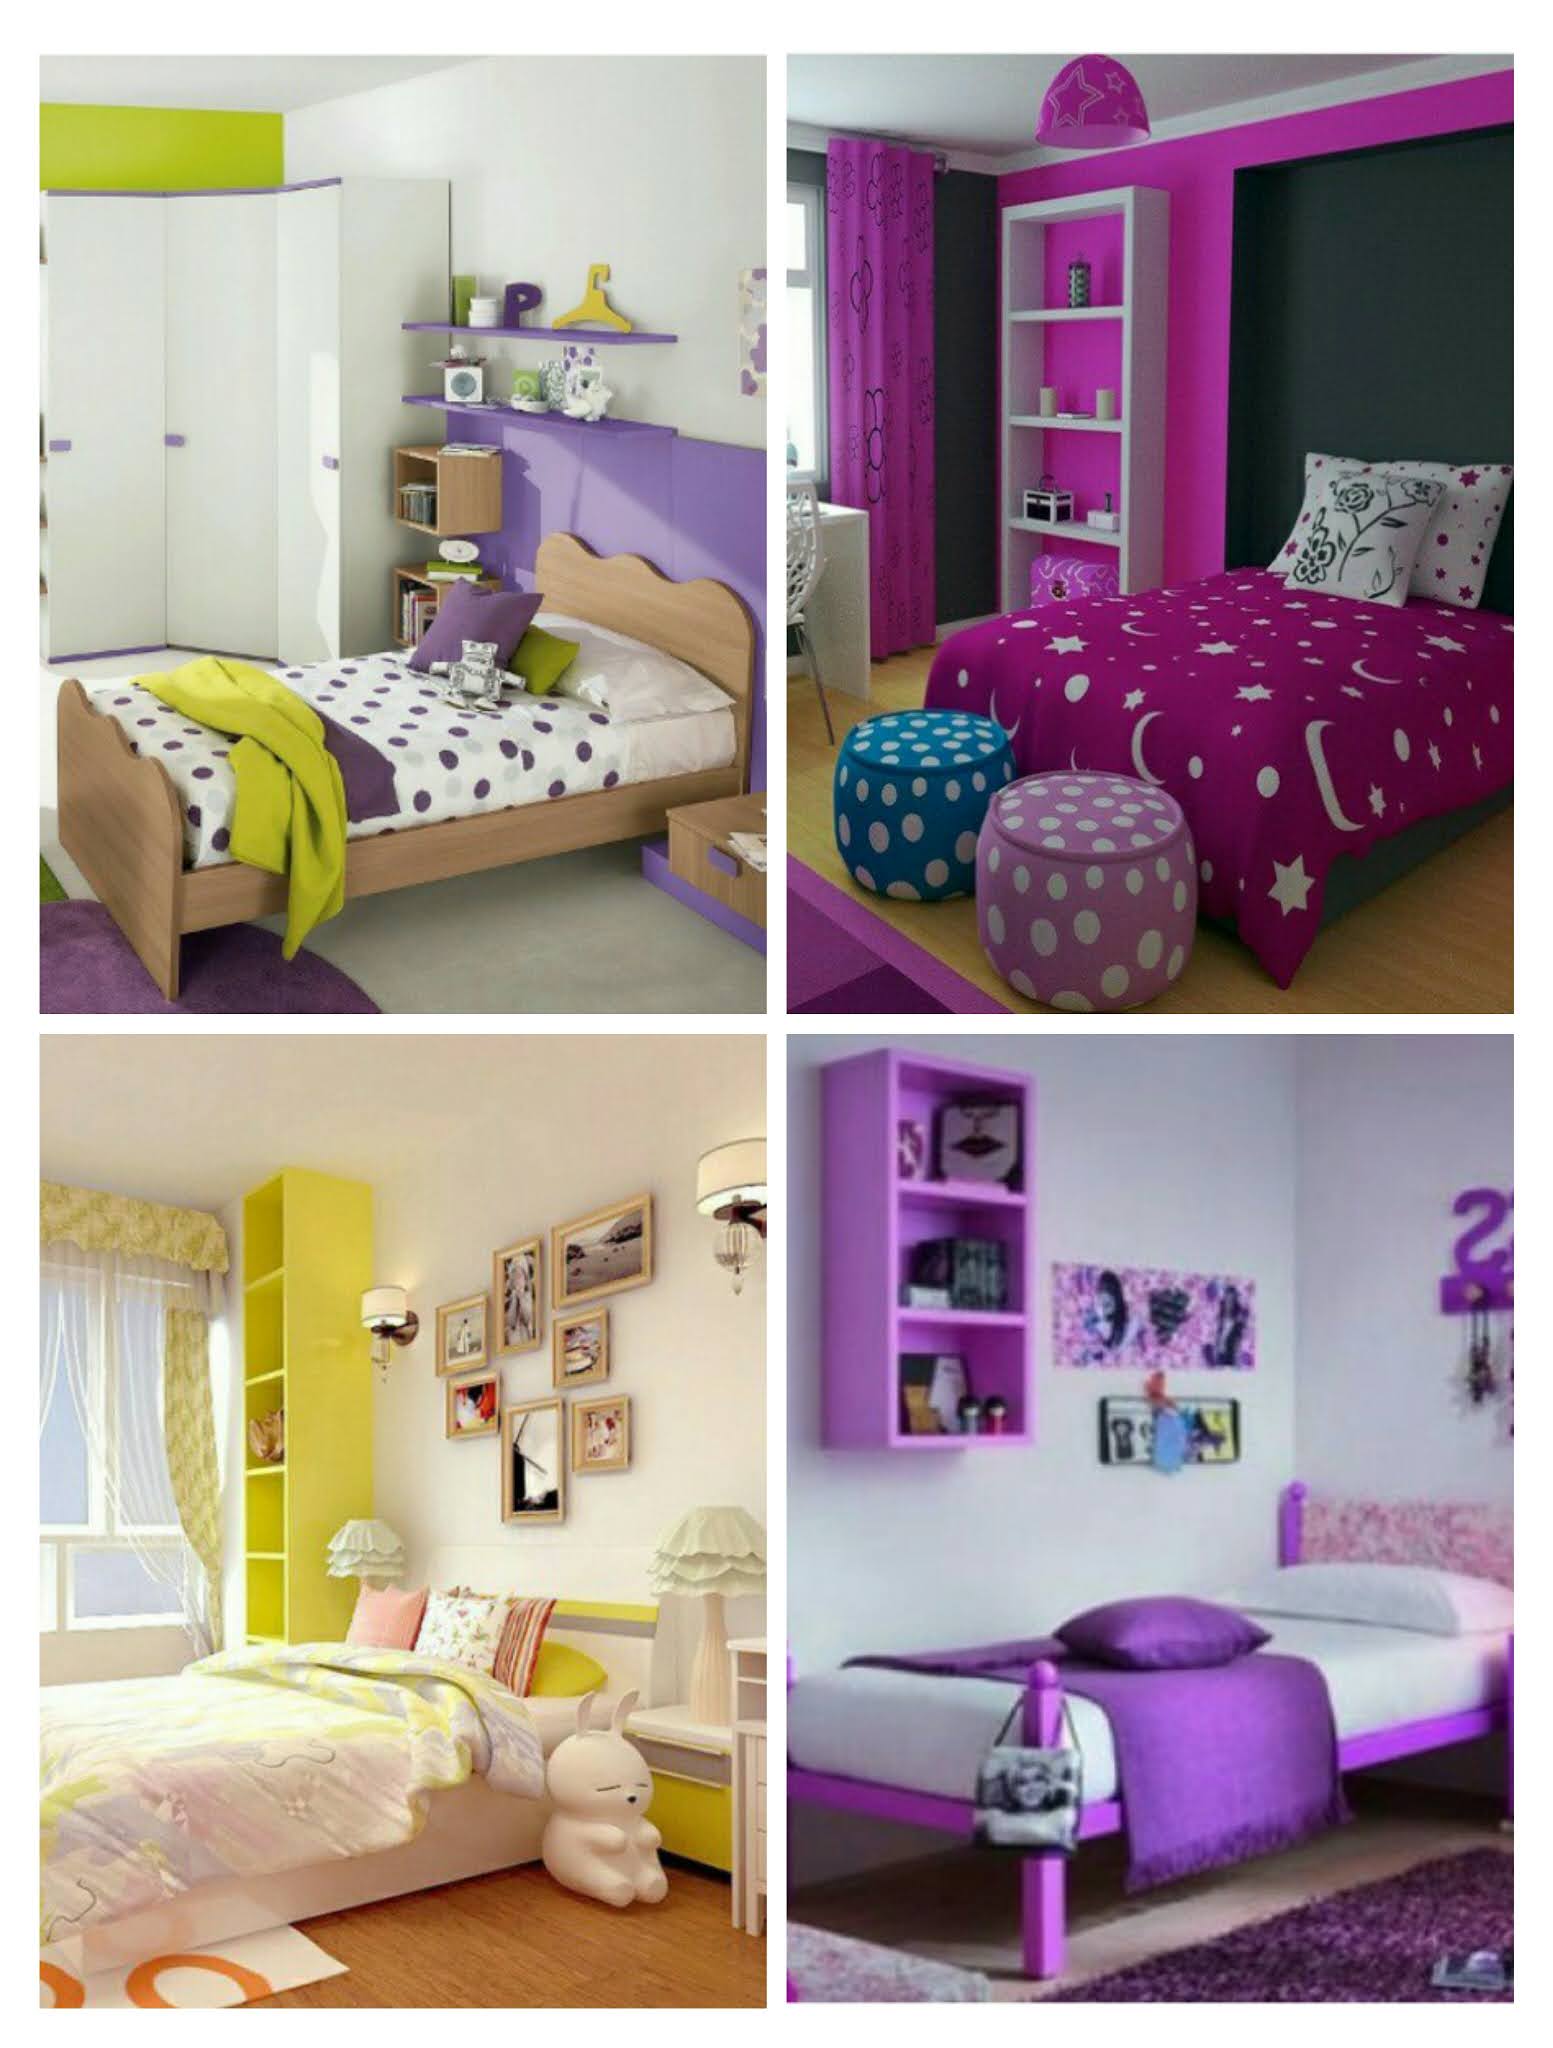 Bedroom Decoration Ideas For A Woman